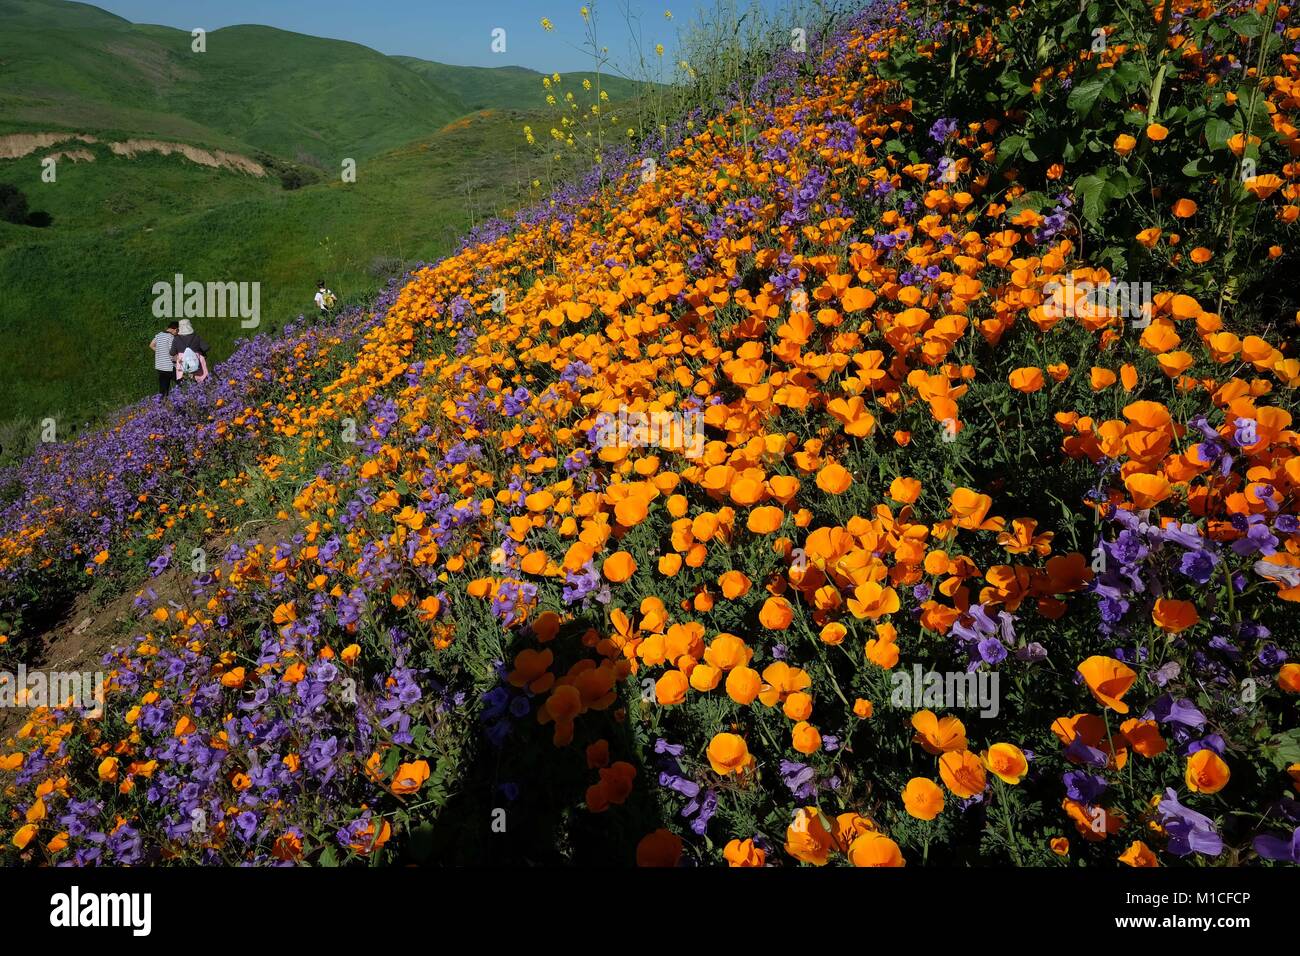 Chino Hills, California, USA. 12th Mar, 2017. With the wettest winter California has seen in years, wild flowers are blooming across the south land including Chino Hills, foothills of the Santa Ana Mountains, where a carpet of orange poppies have sprung up in the now lush green state park. The poppy is the California state flower. Chino Hills State Park, a natural open-space area in the hills of Santa Ana Canyon near Riverside, is a critical link in the Puente-Chino Hills biological corridor. It encompasses stands of oaks, sycamores and rolling, grassy hills that stretch nearly 31 miles, from Stock Photo